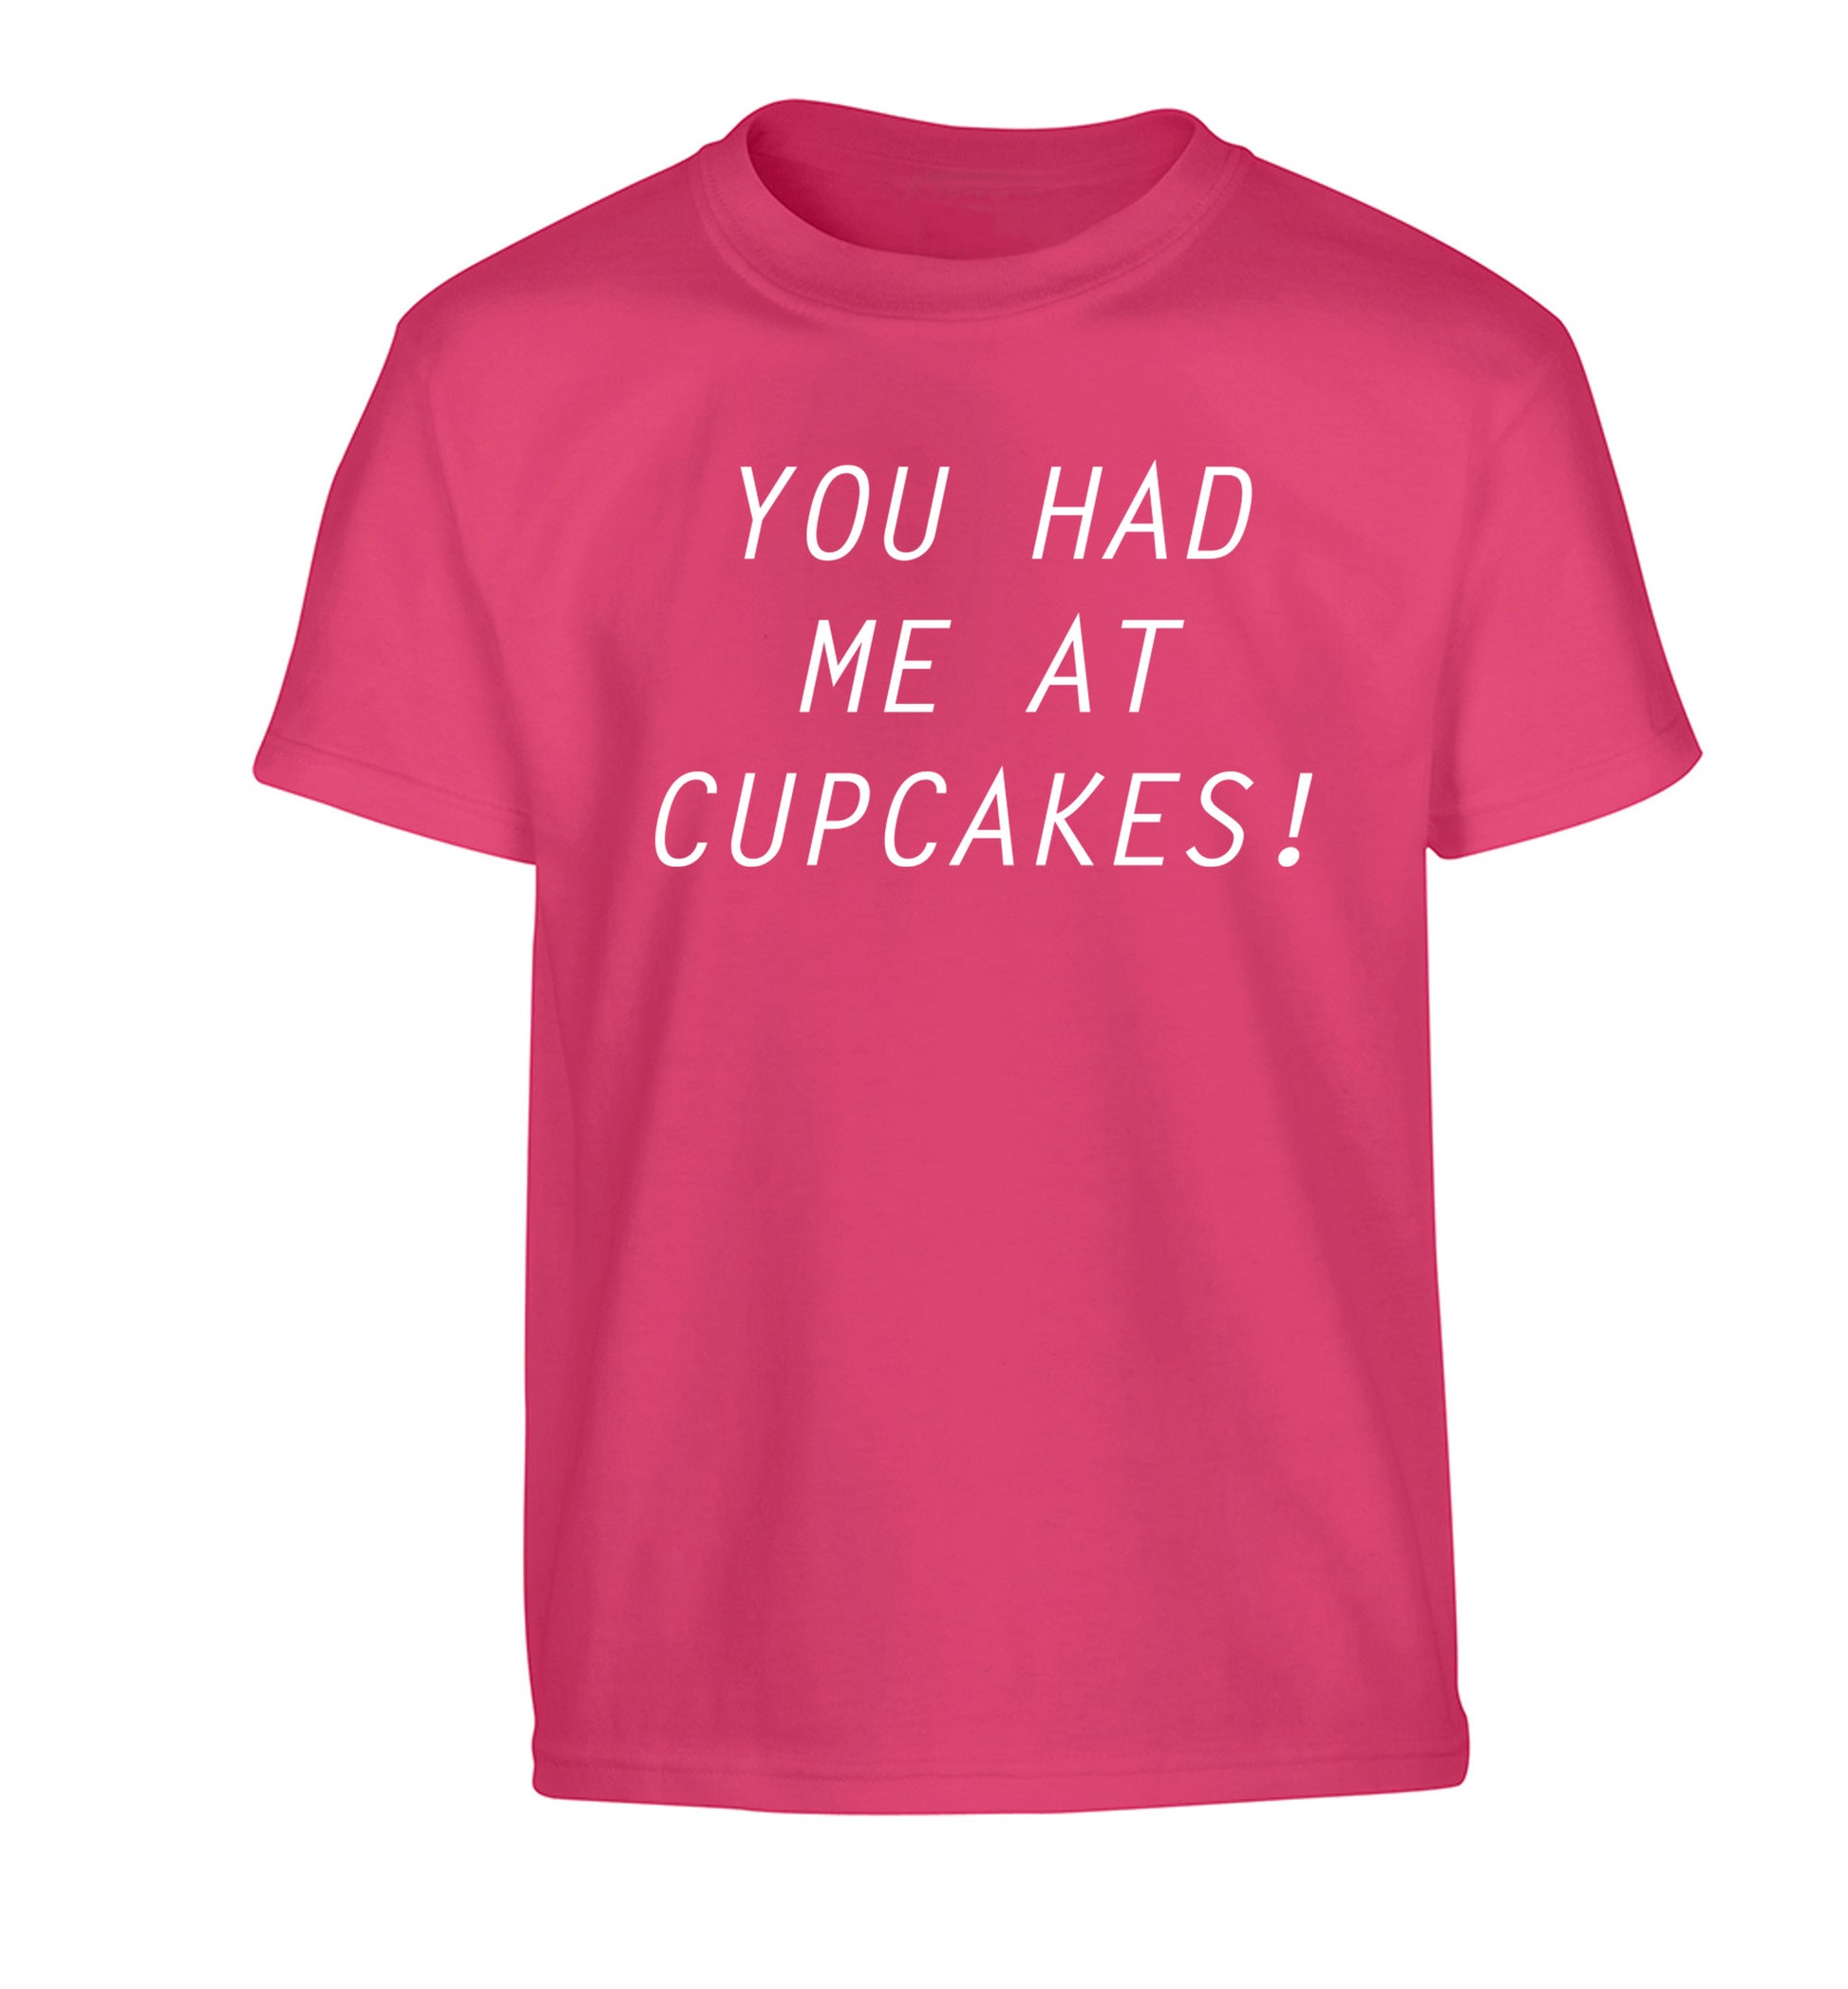 You had me at cupcakes Children's pink Tshirt 12-14 Years